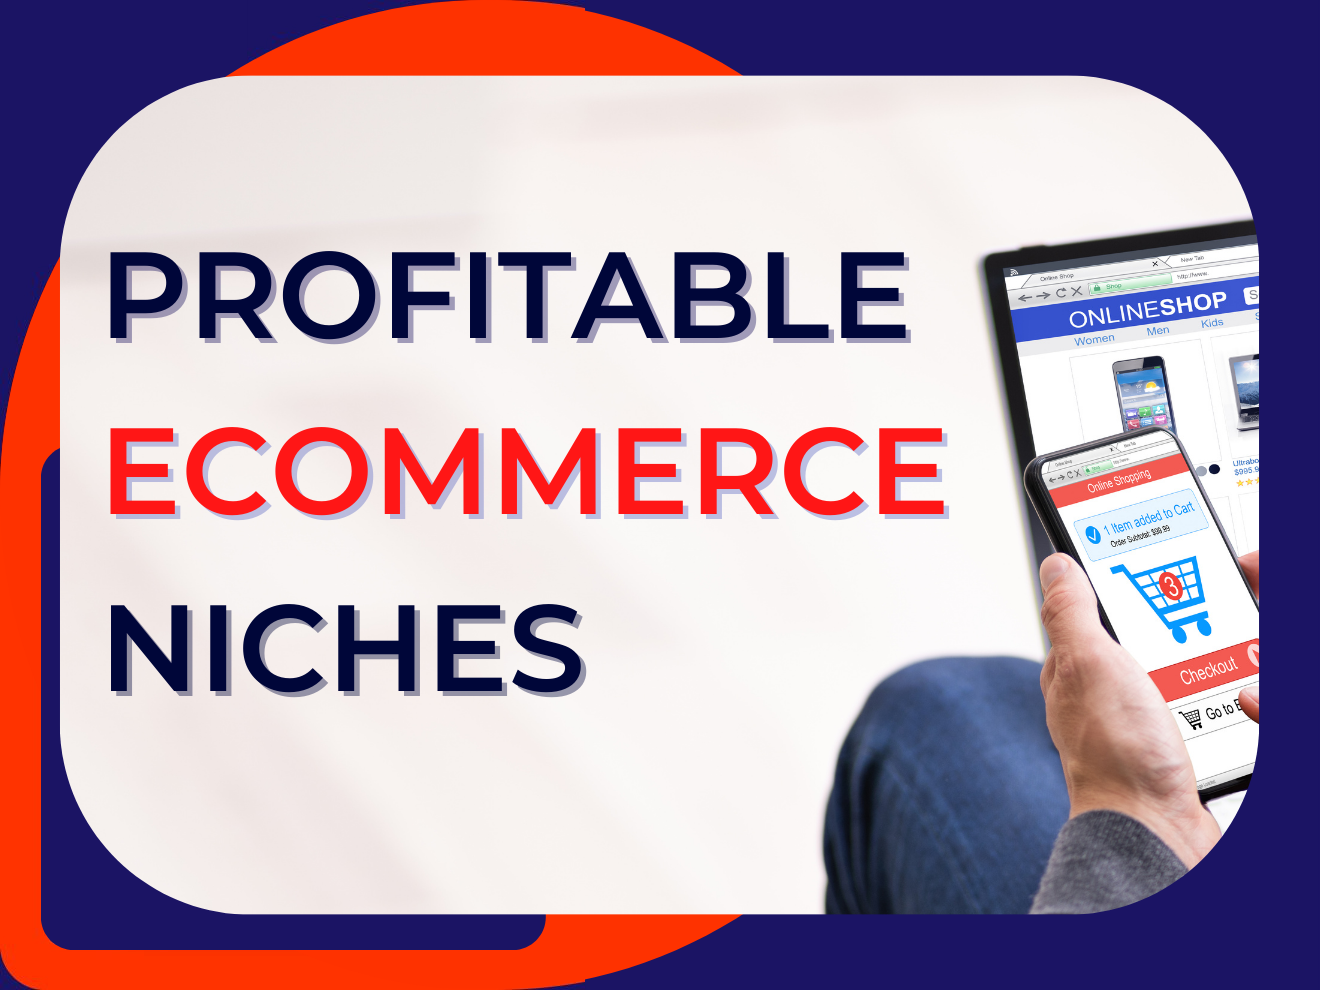 6 Profitable Ecommerce Niches to Consider in 2023